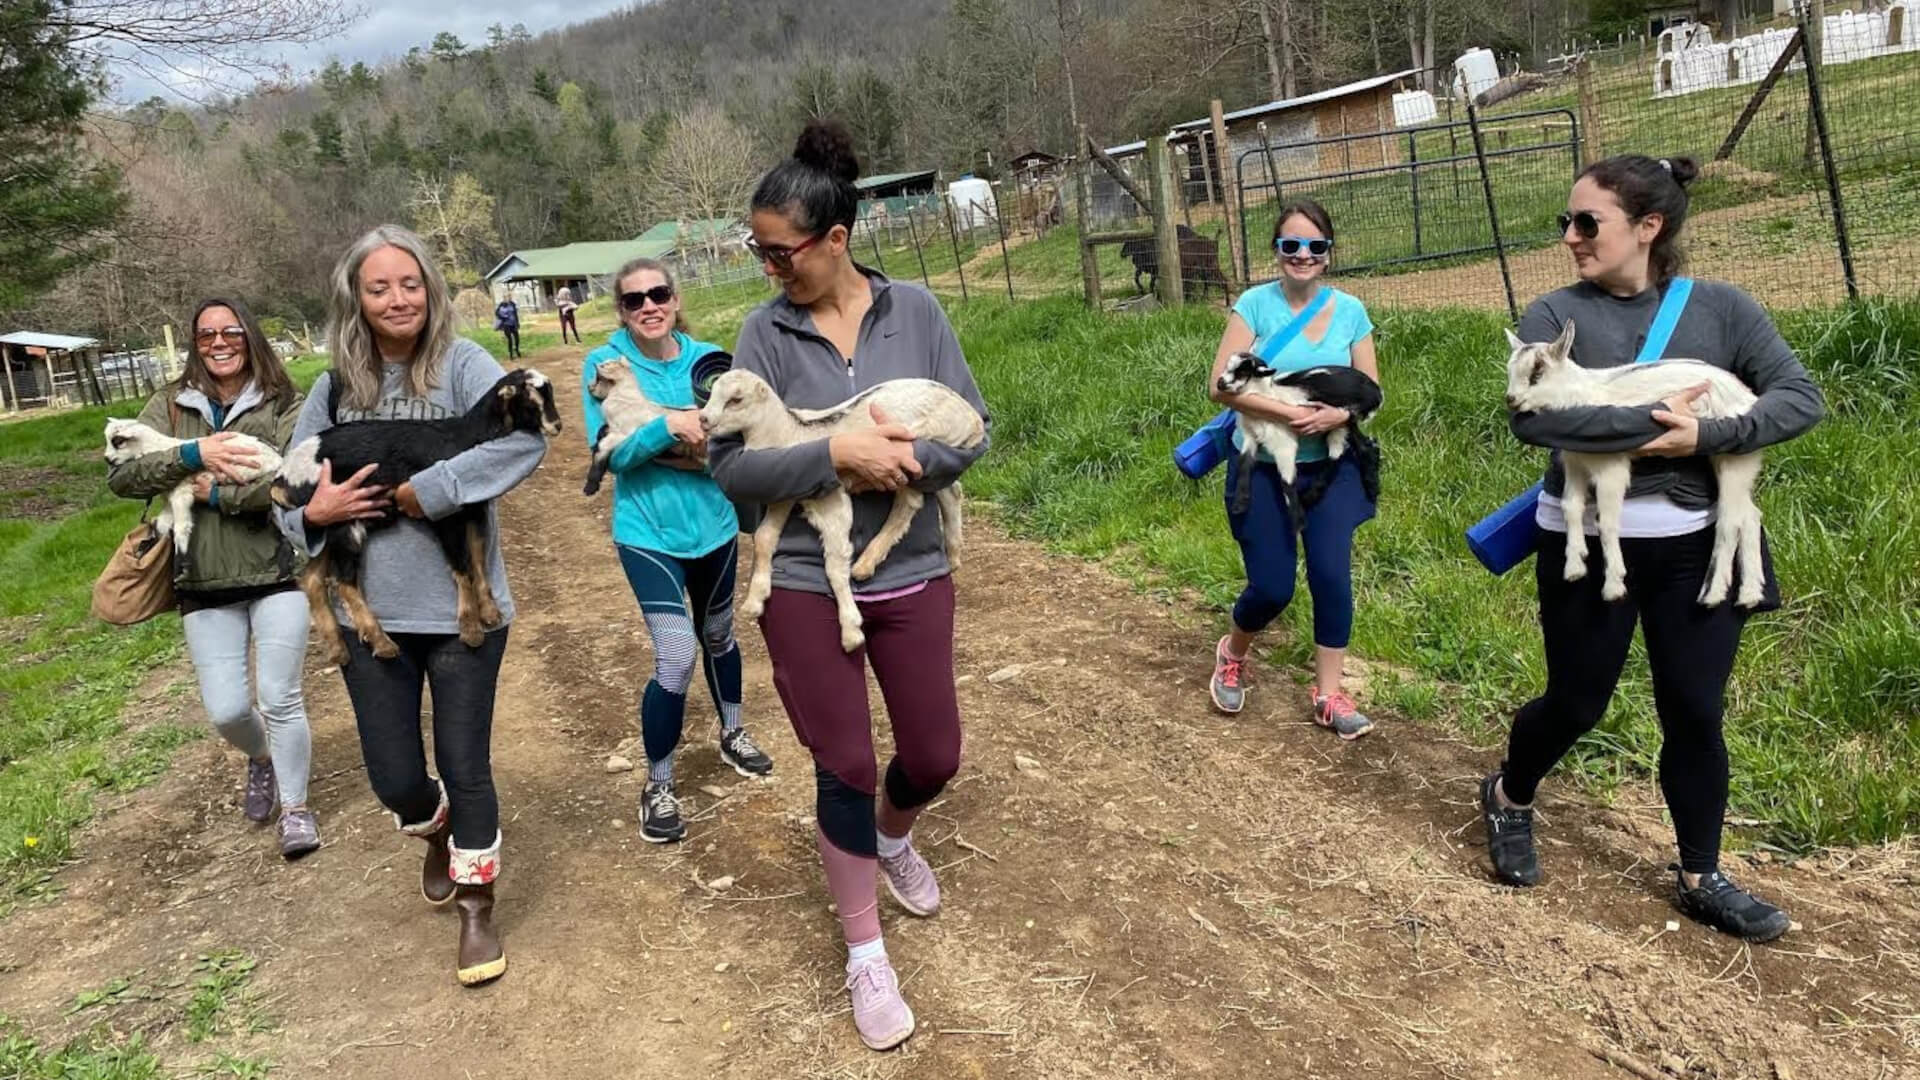 Group of women carrying baby goats down a farm path in Asheville, NC.